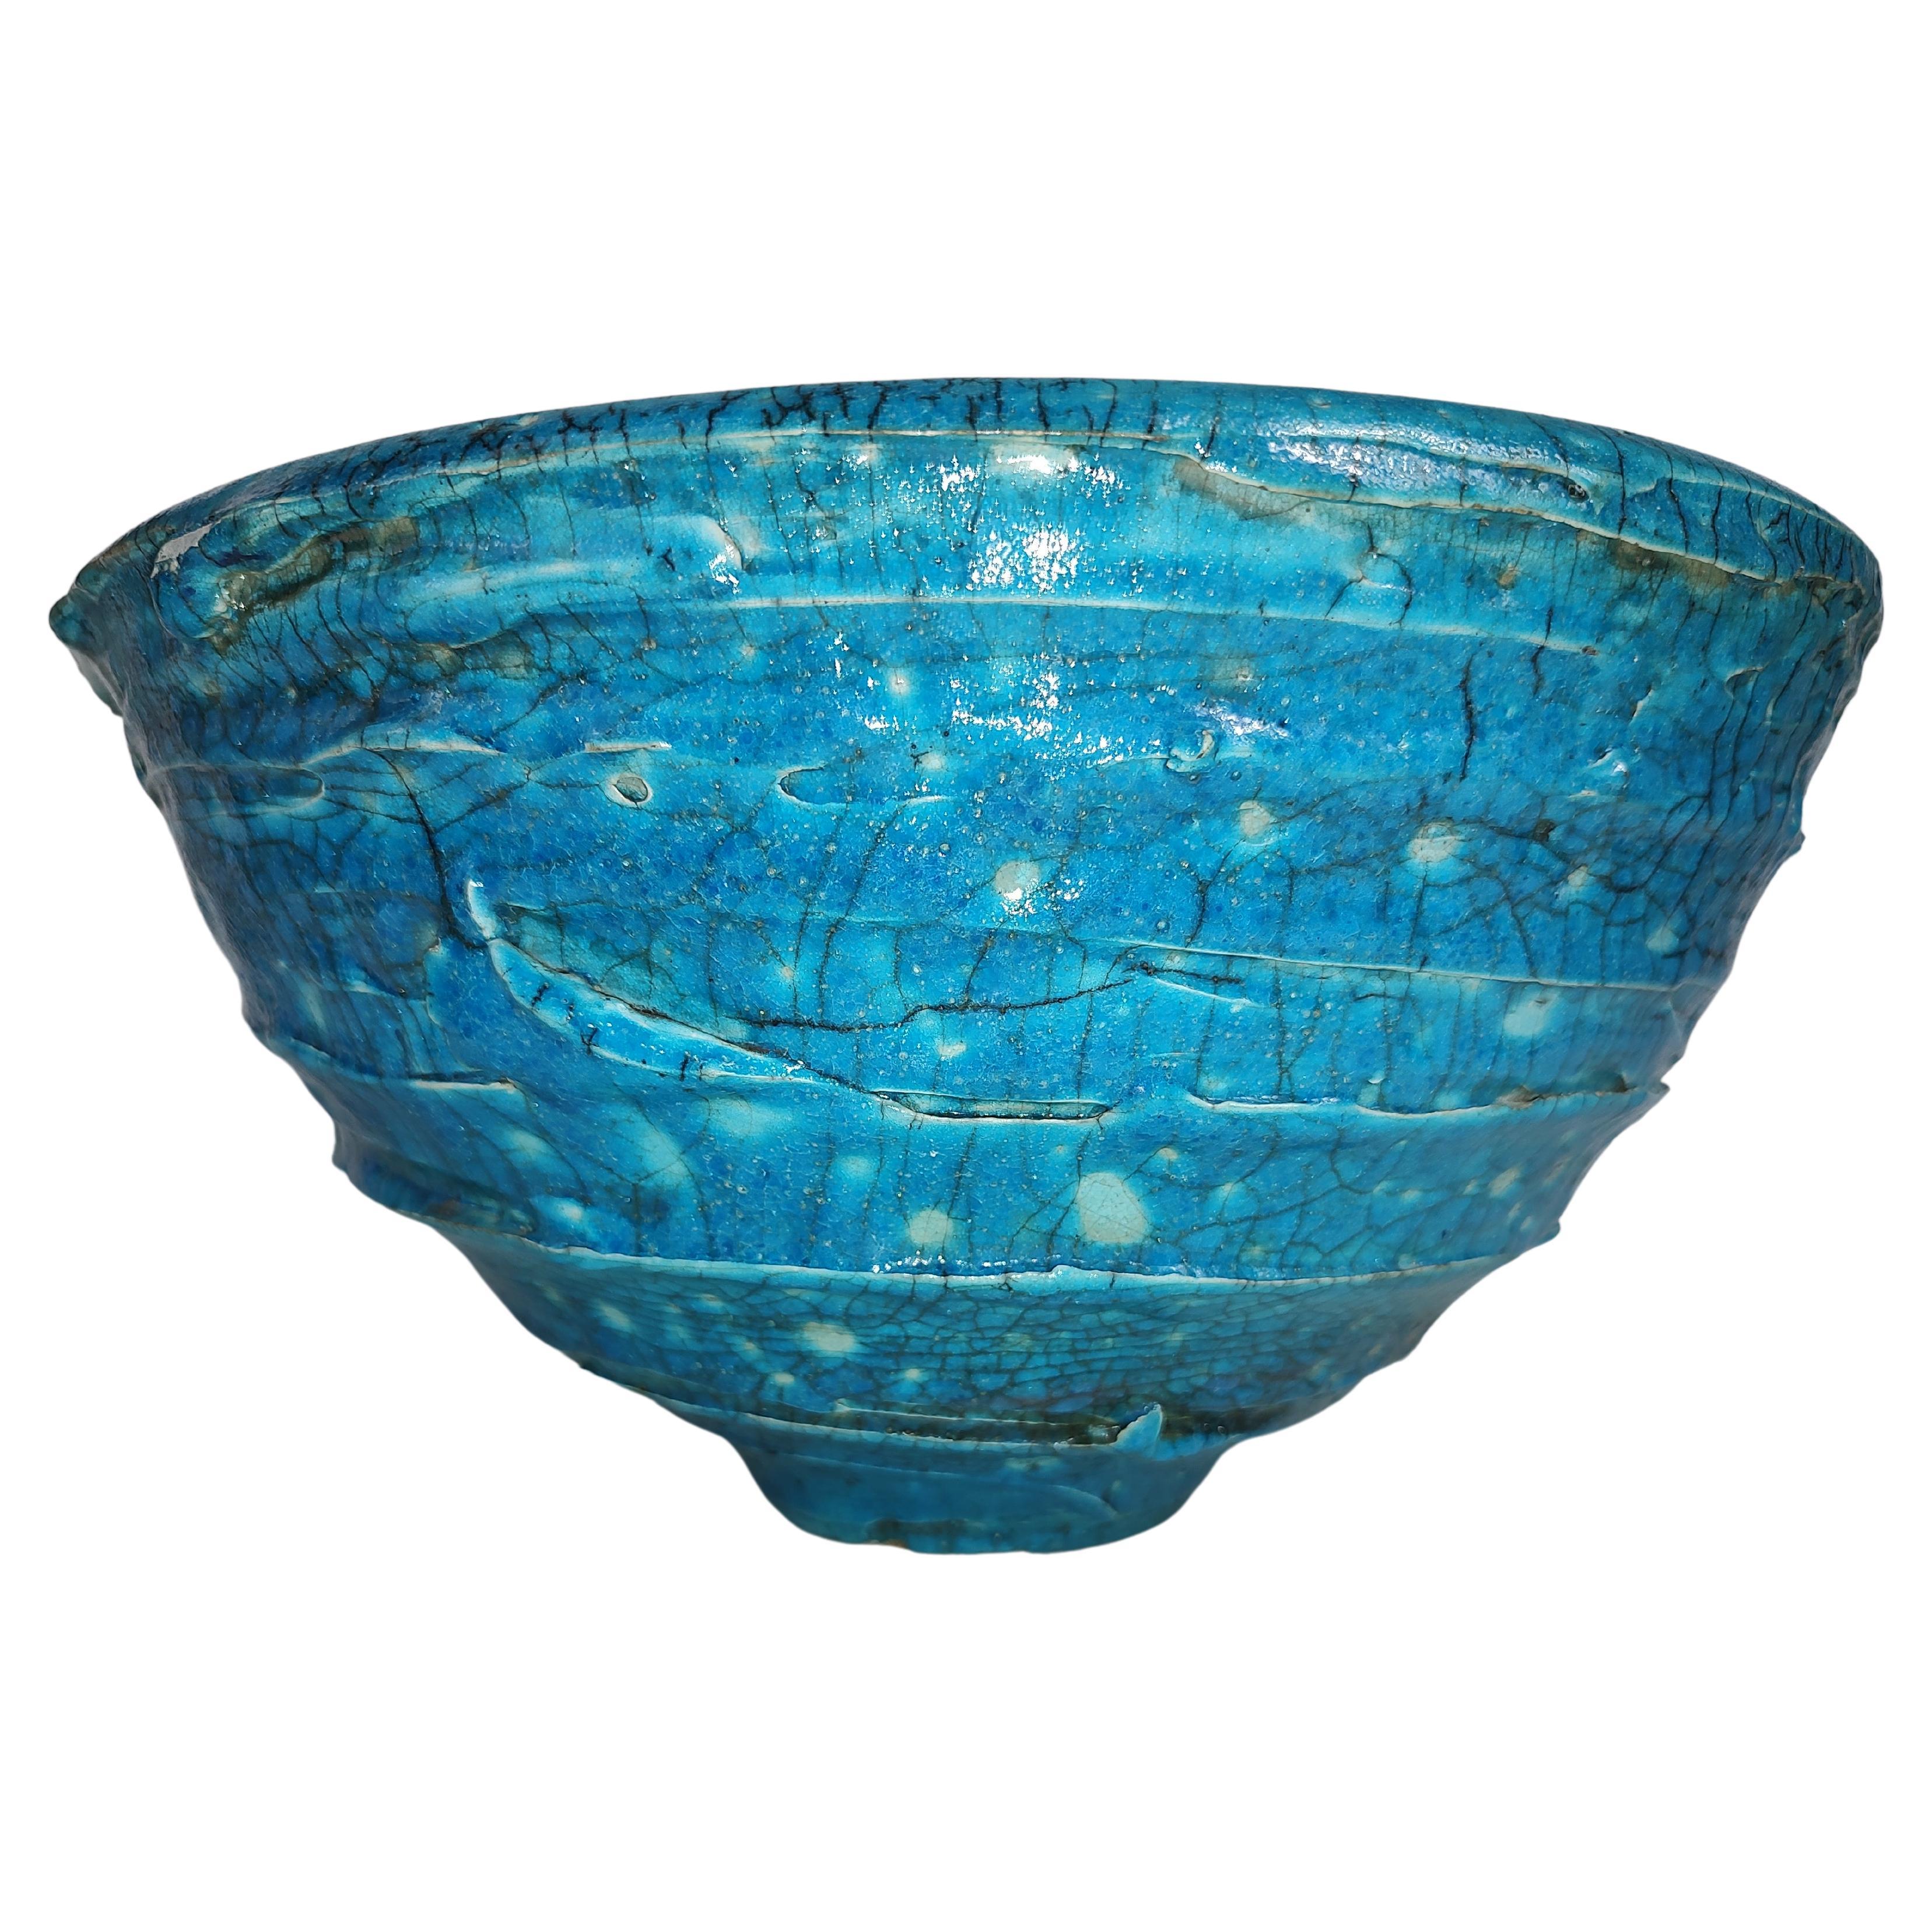 Mid-Century Modern Sculptural Large Art Pottery Bowl in Turquoise Blue For Sale